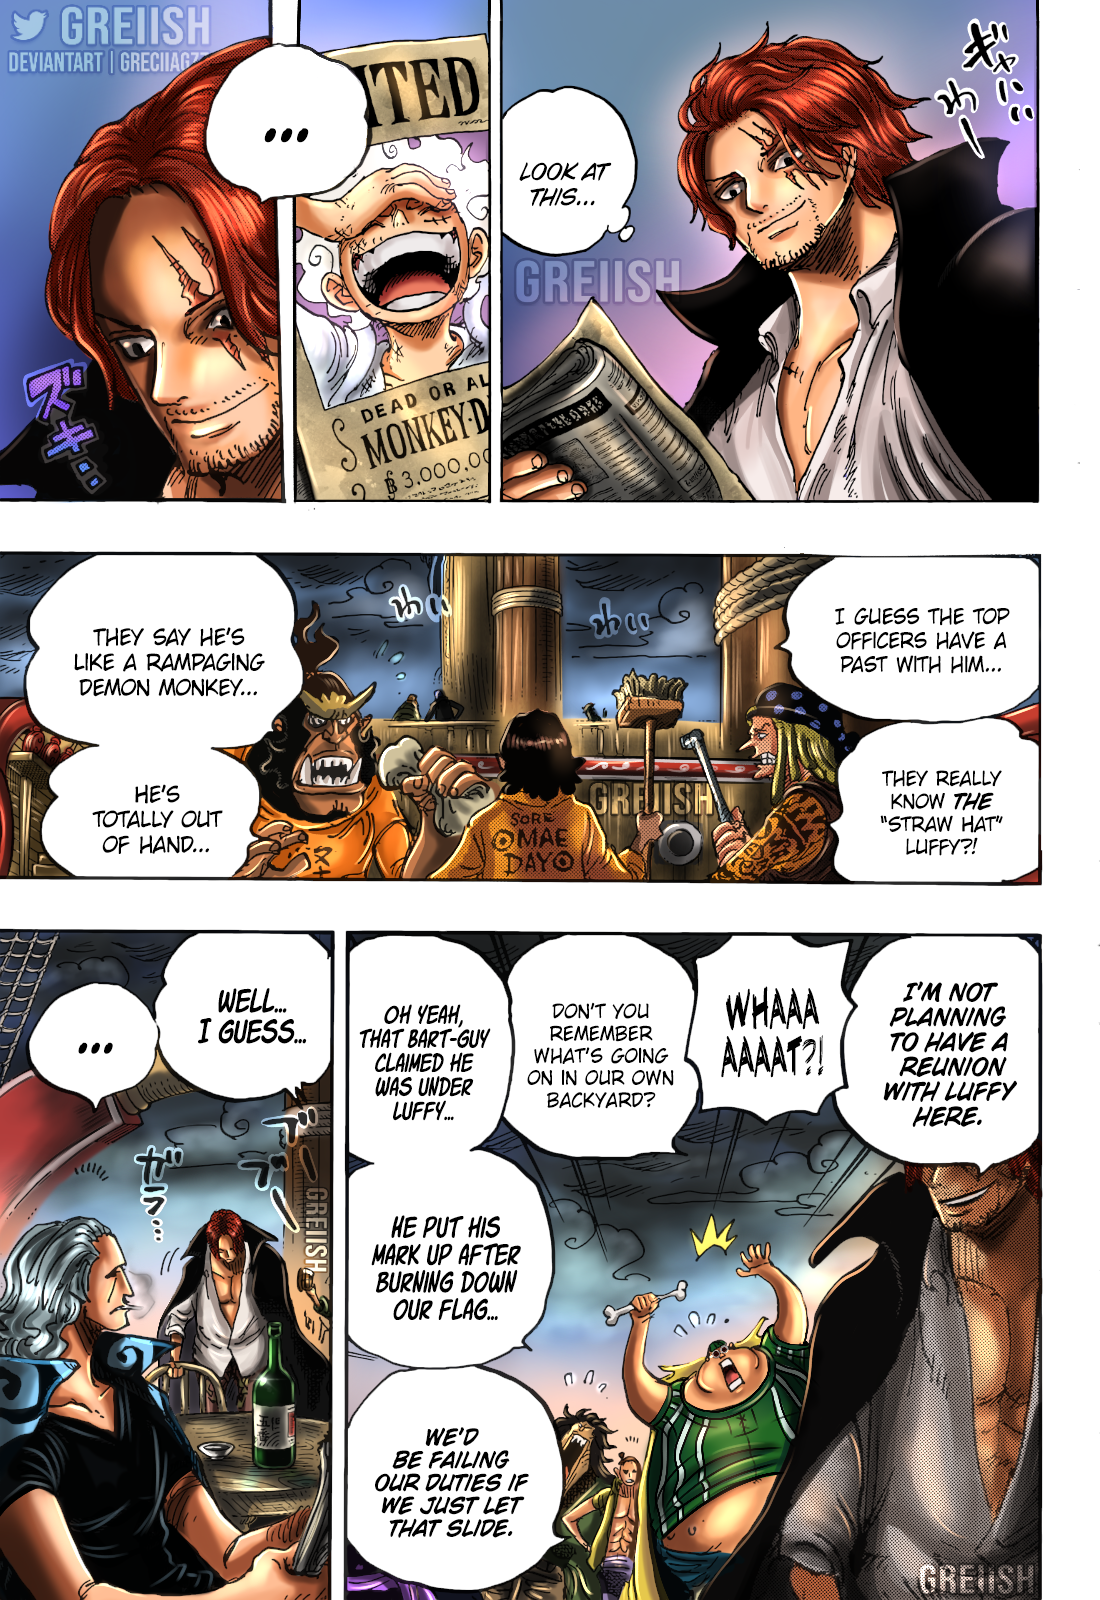 The End - Read One Piece Manga Chapter 1057 Fully Coloured